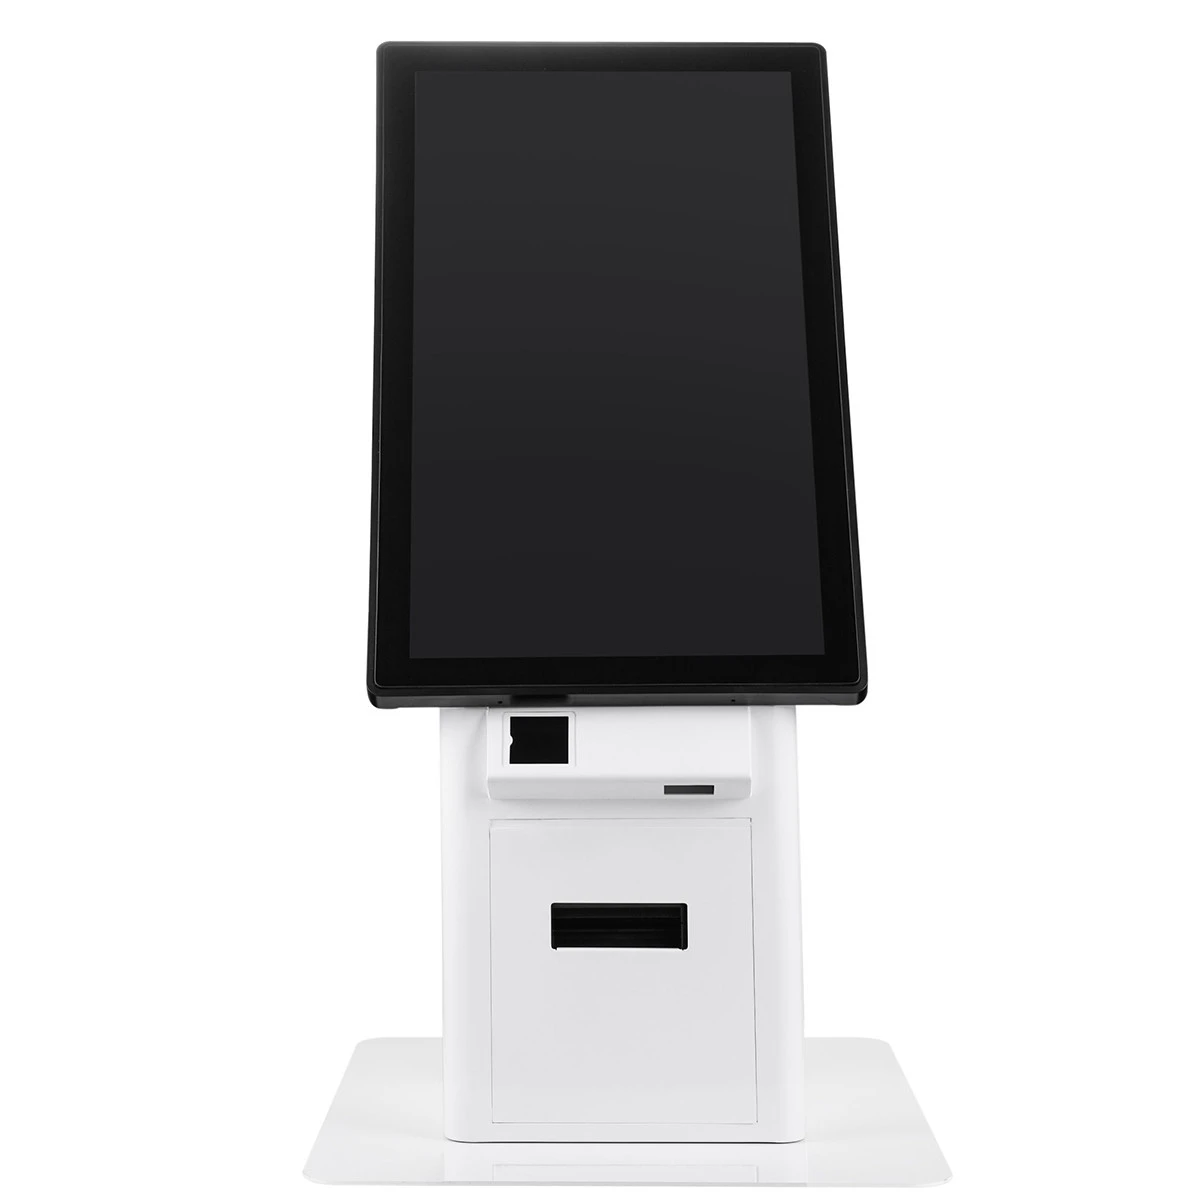 23.6 Inch Touch Screen Self-checkout Kiosk, Automated Order Payment Kiosk Self-service Ordering System Checkout Kiosk